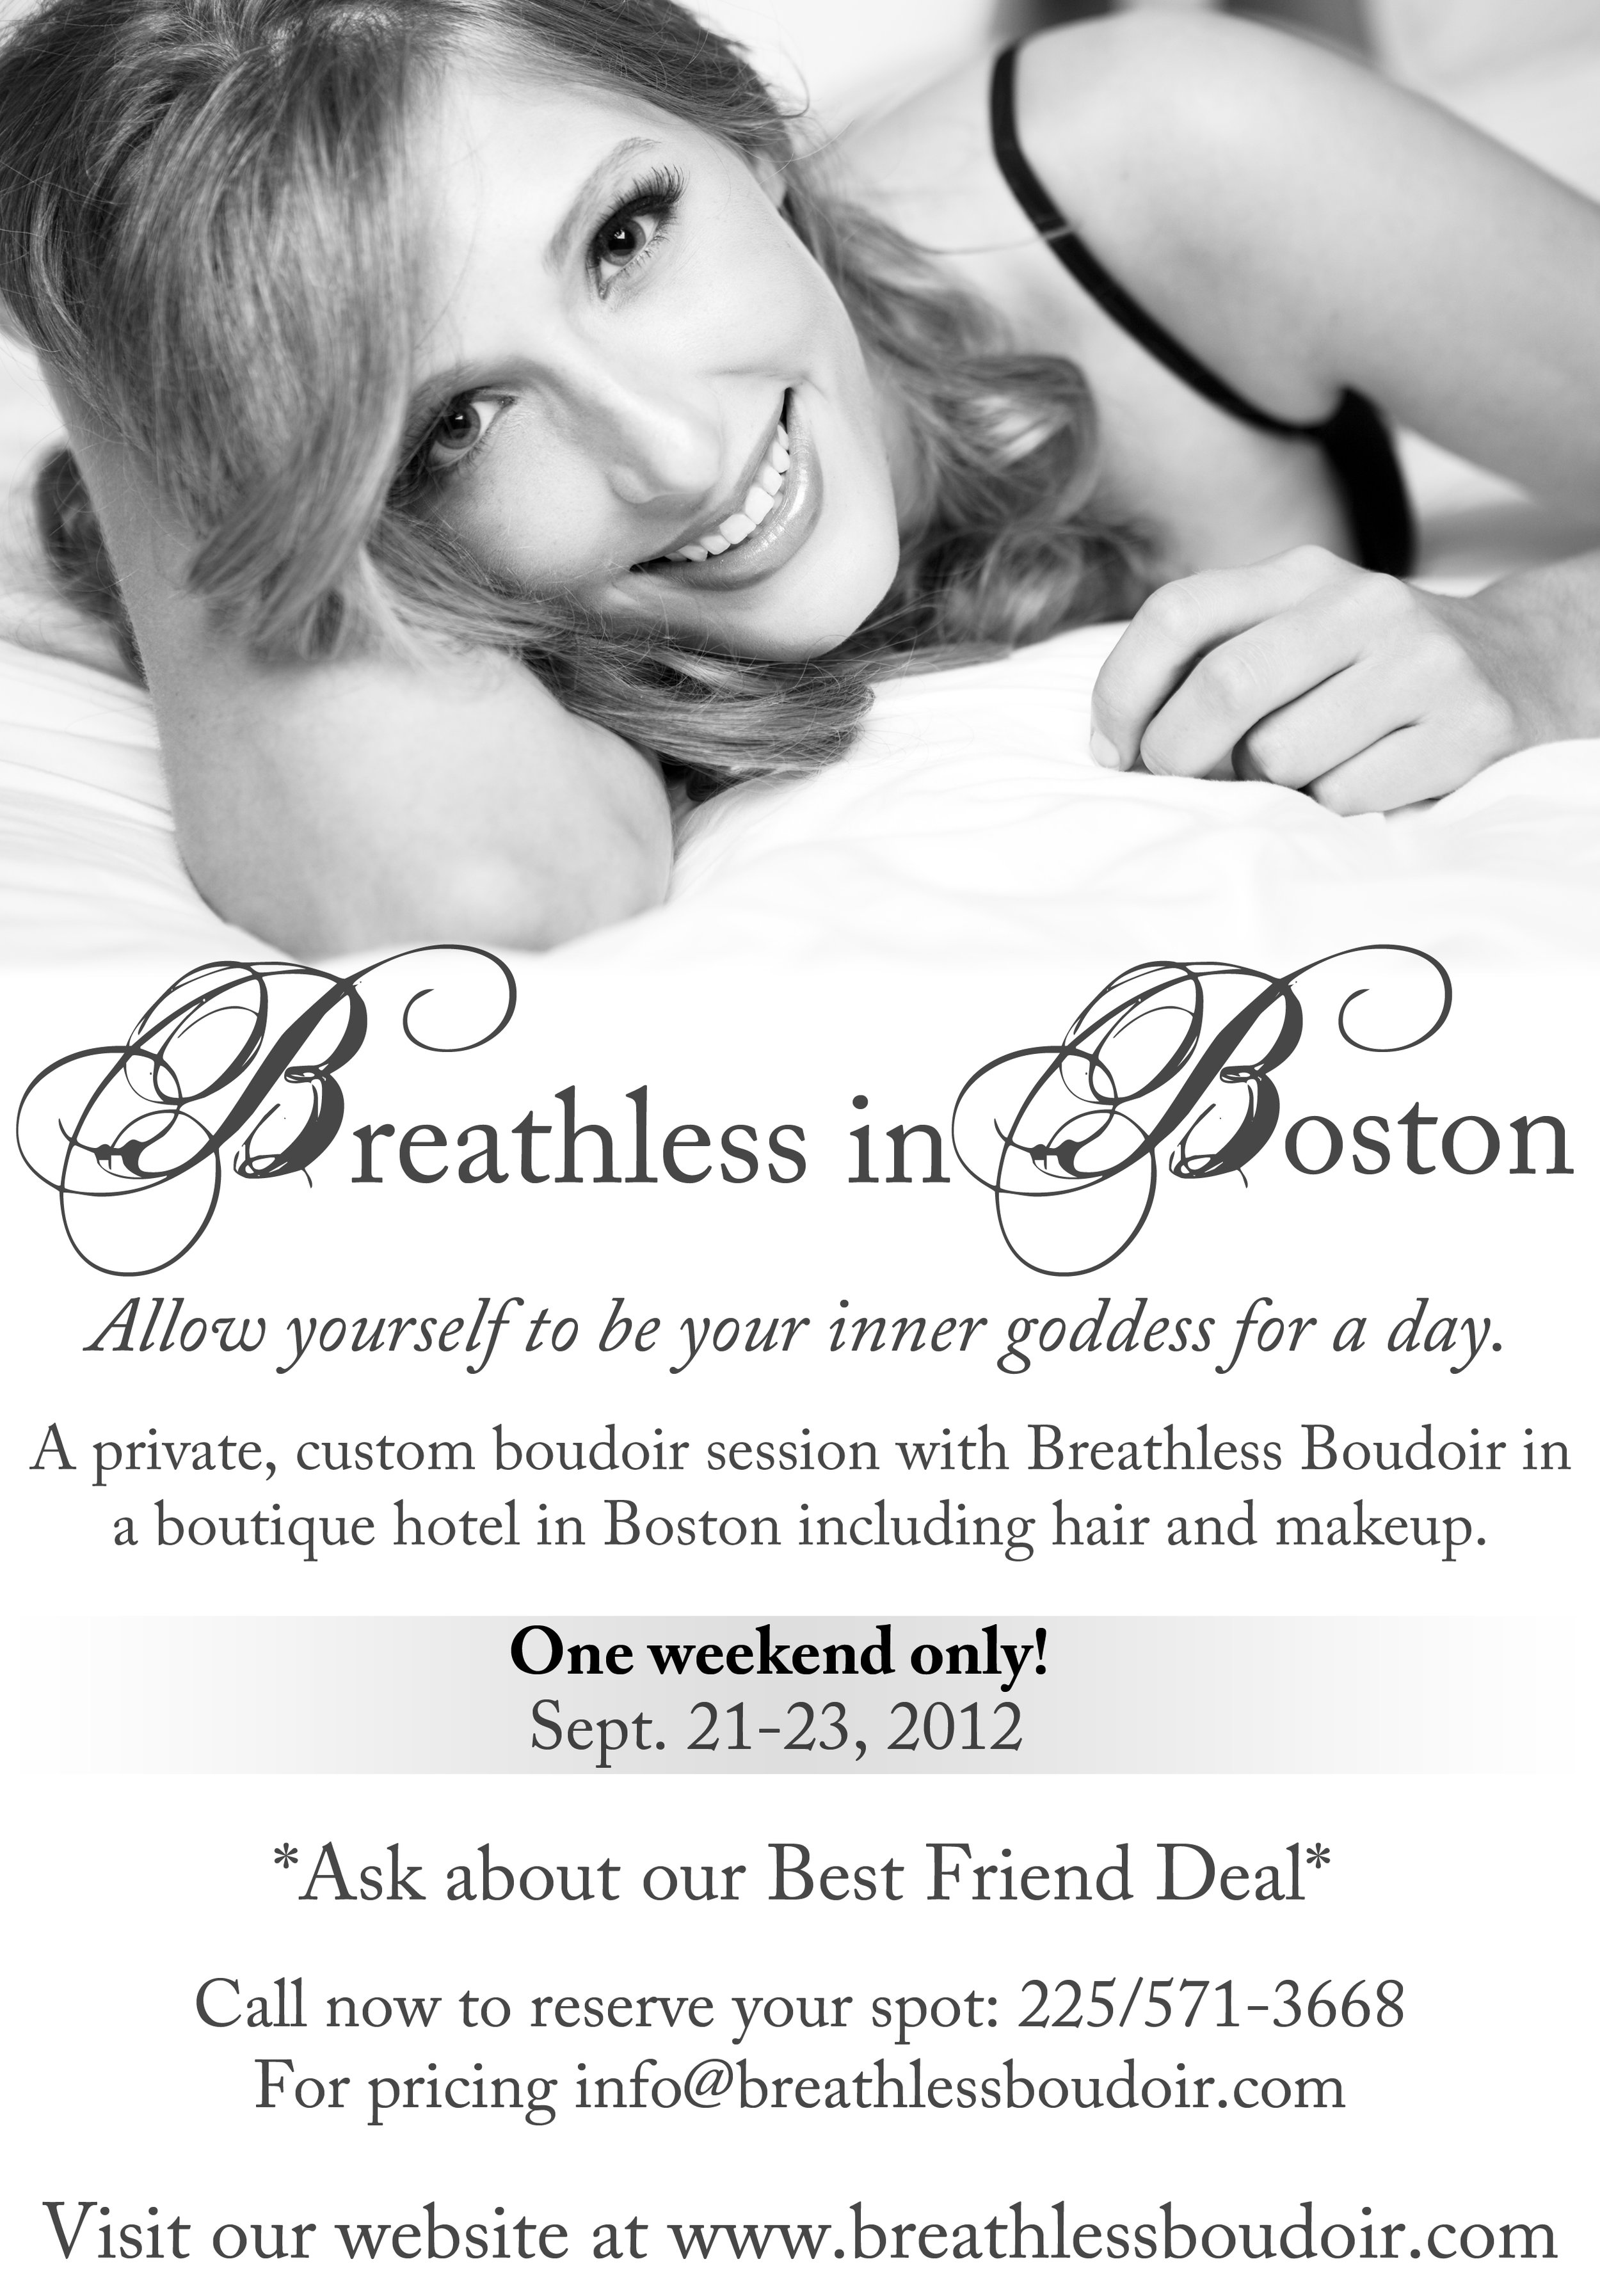 For one weekend only, Breathless Boudoir is bring the most sultry and sizzl...